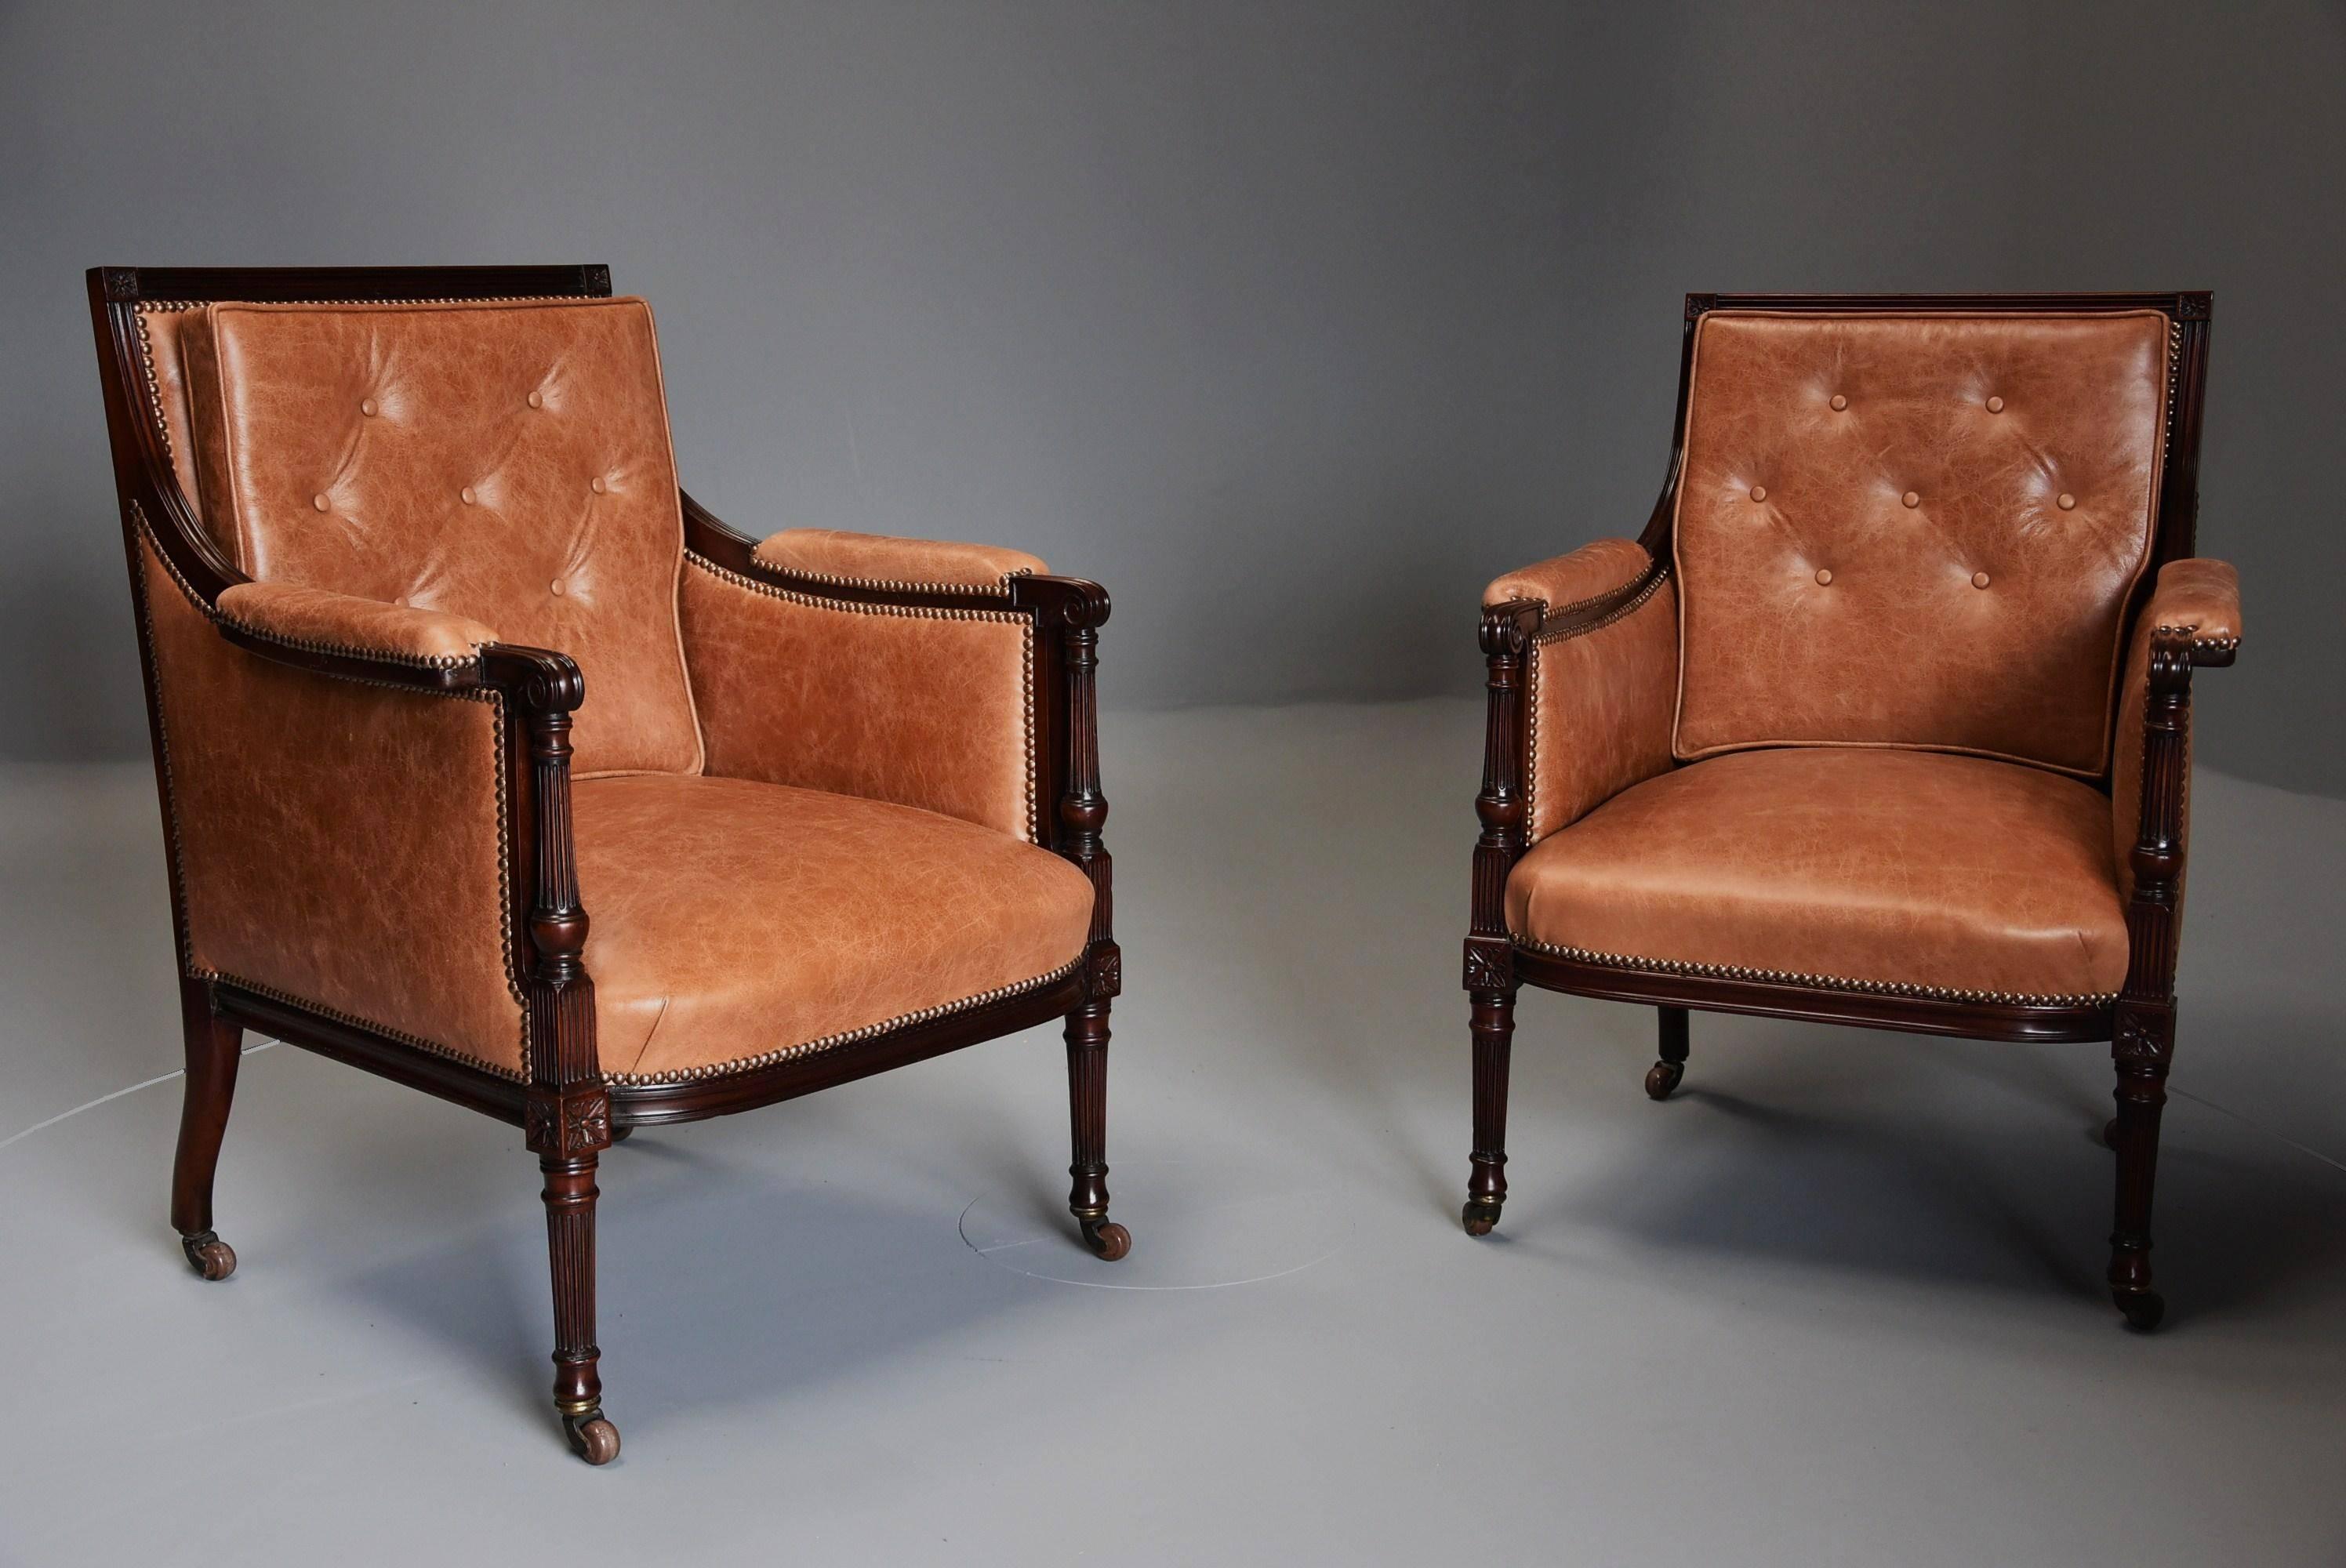 Sheraton Superb Pair of Late 19th Century ‘His & Hers’ Mahogany Bergere Library Chairs